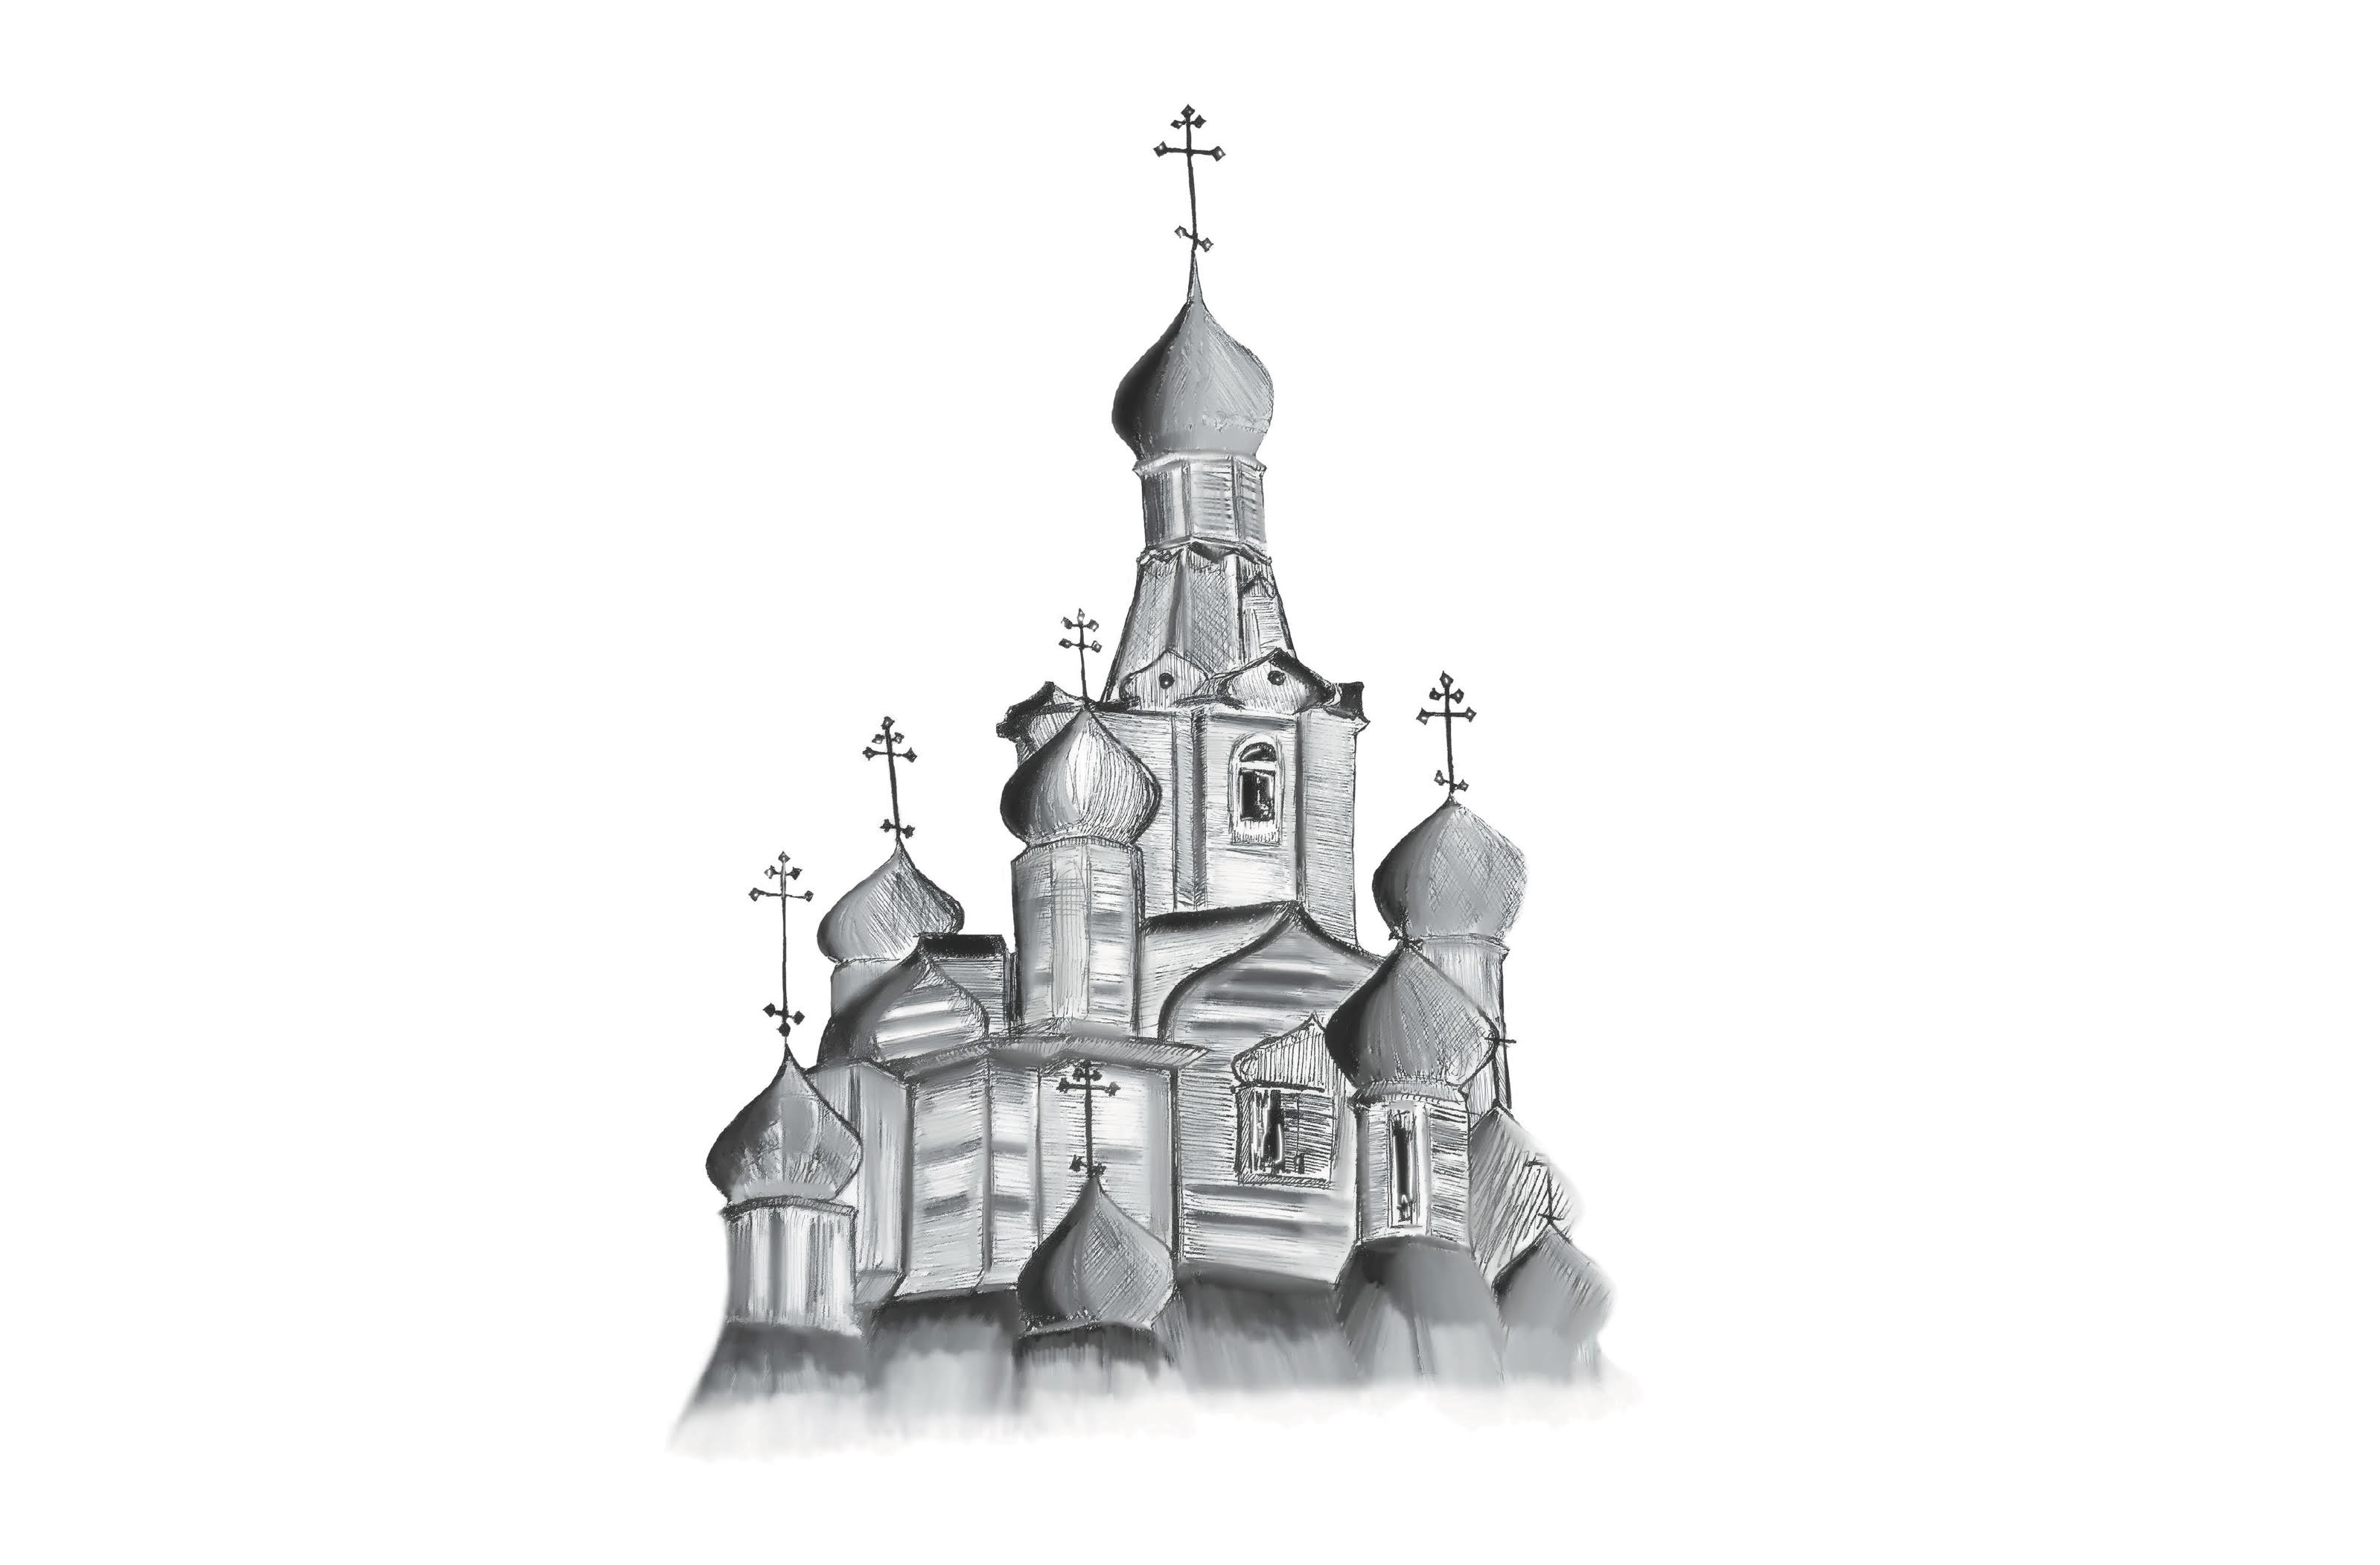 Clickable thumbnail of a Russian Orthodox Church.